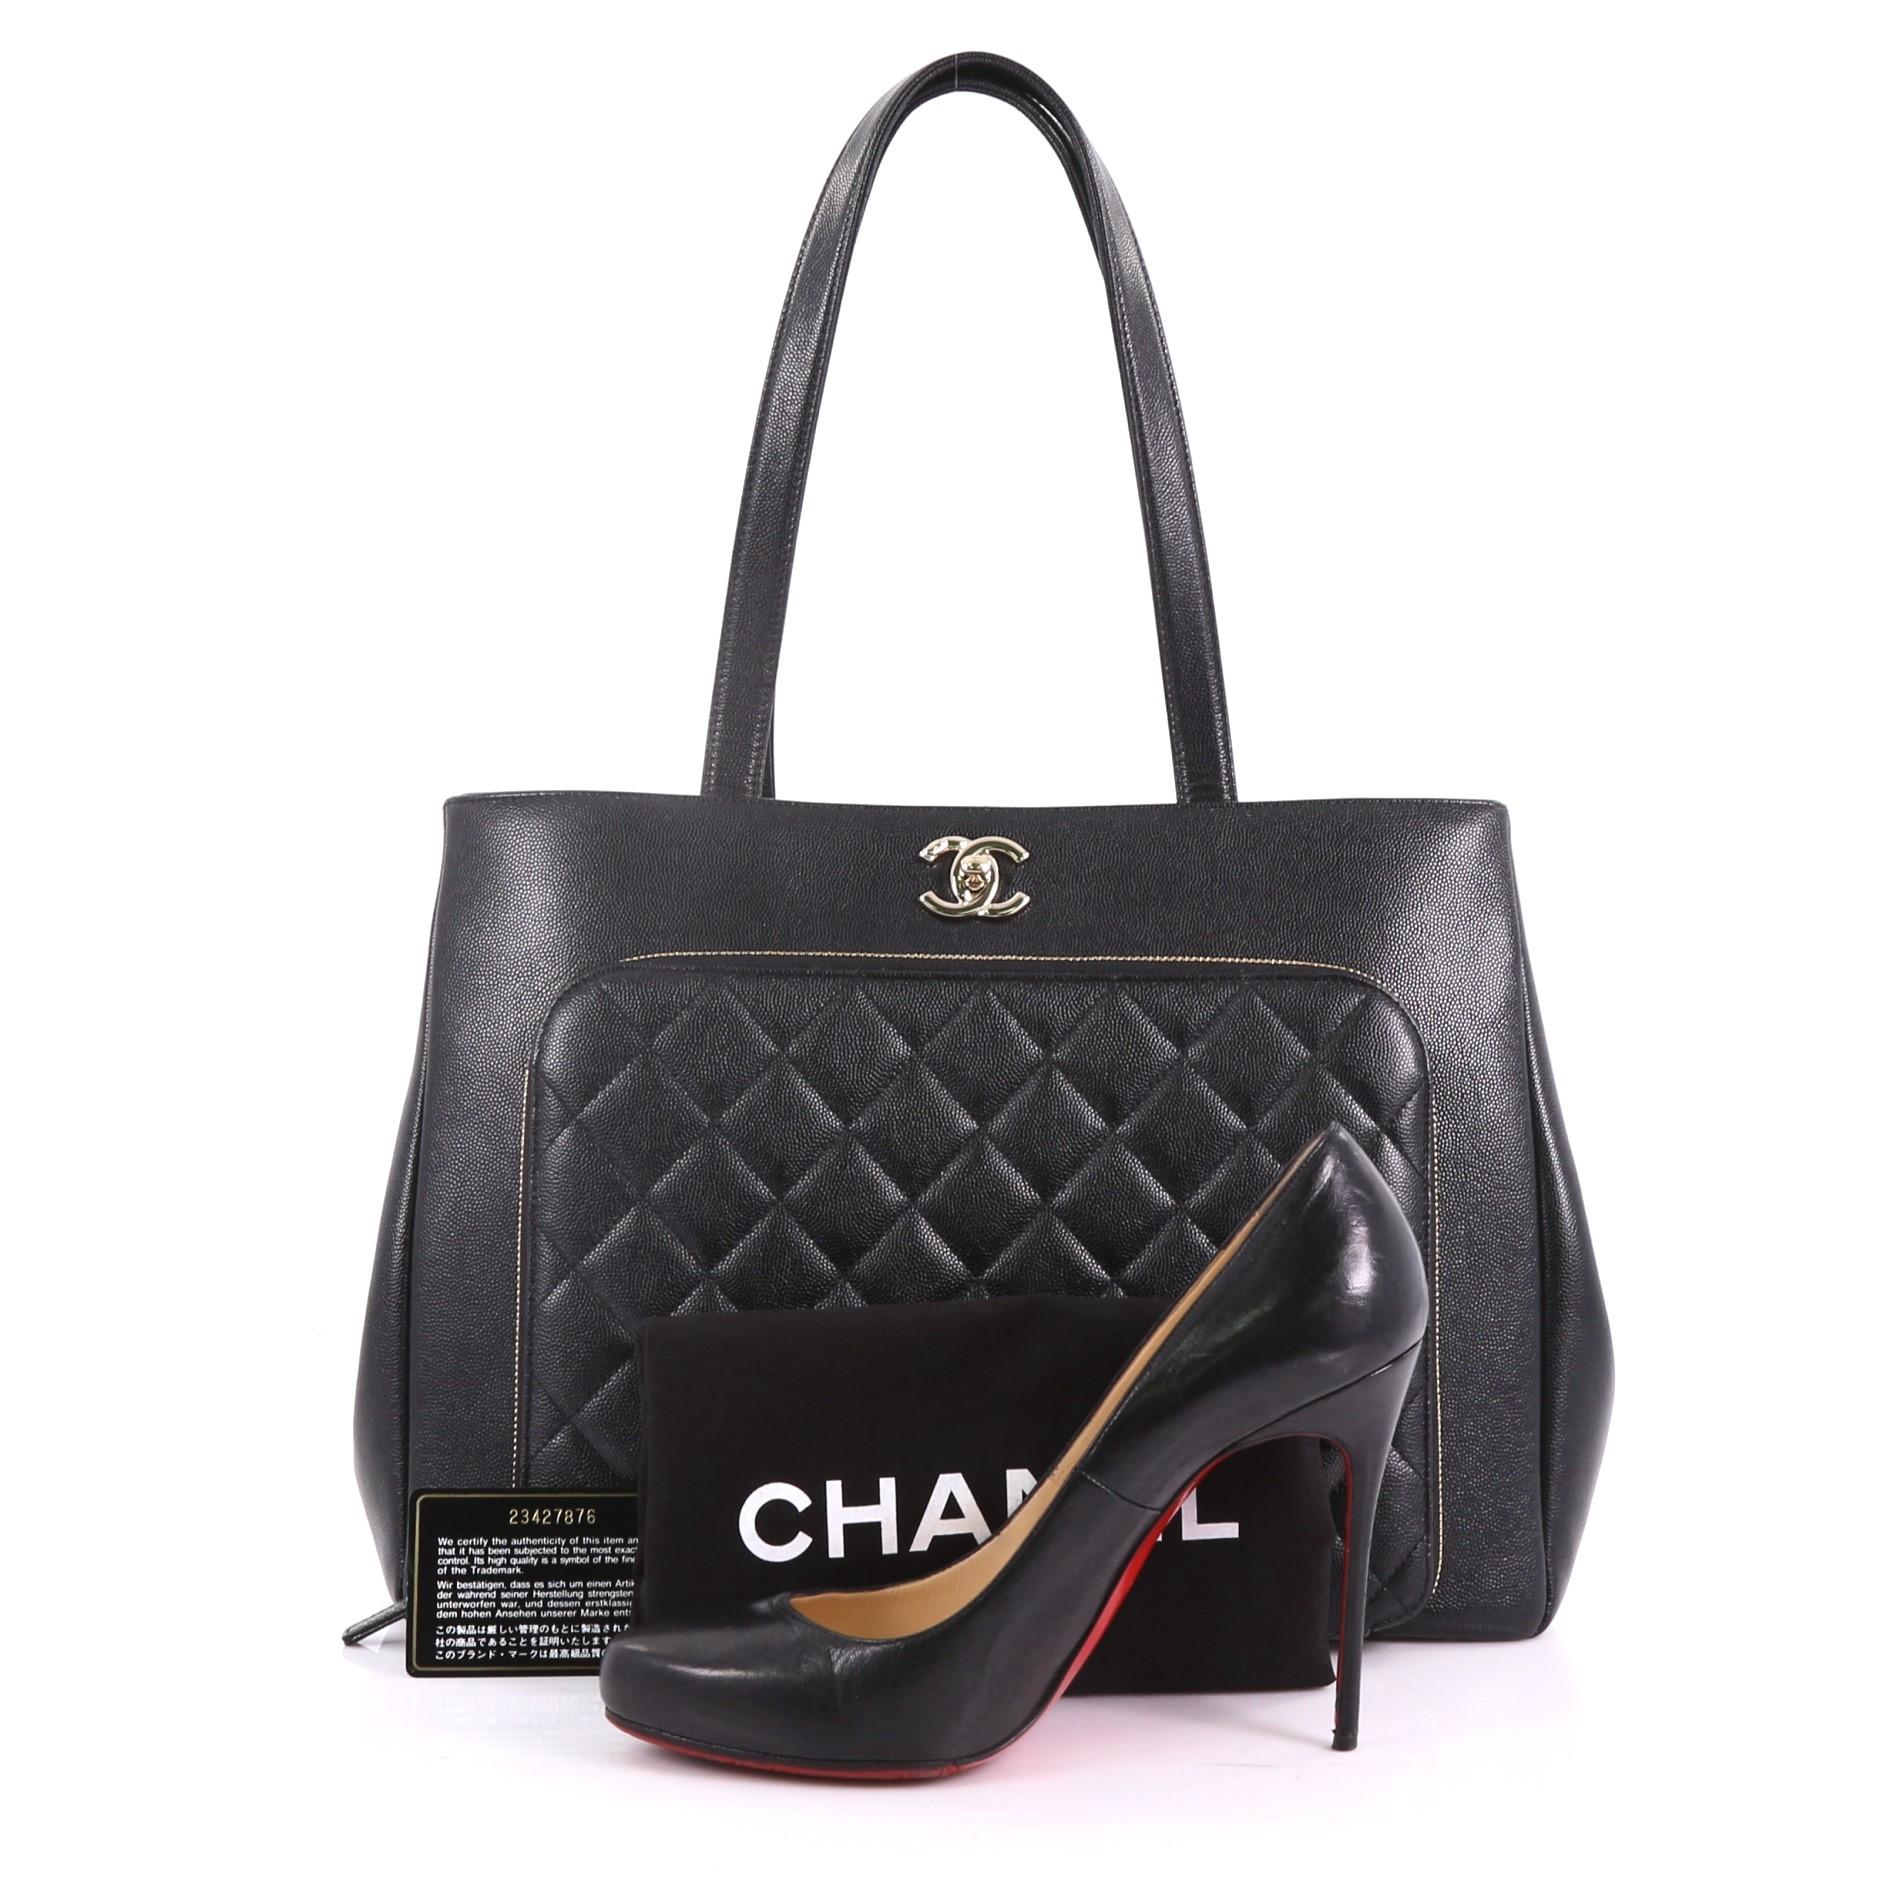 This Chanel Business Affinity Tote Quilted Caviar Large, crafted from black quilted caviar, features dual flat leather handles, front zip pocket, and gold-tone hardware. Its turn-lock closure opens to a burgundy leather interior with zip and slip